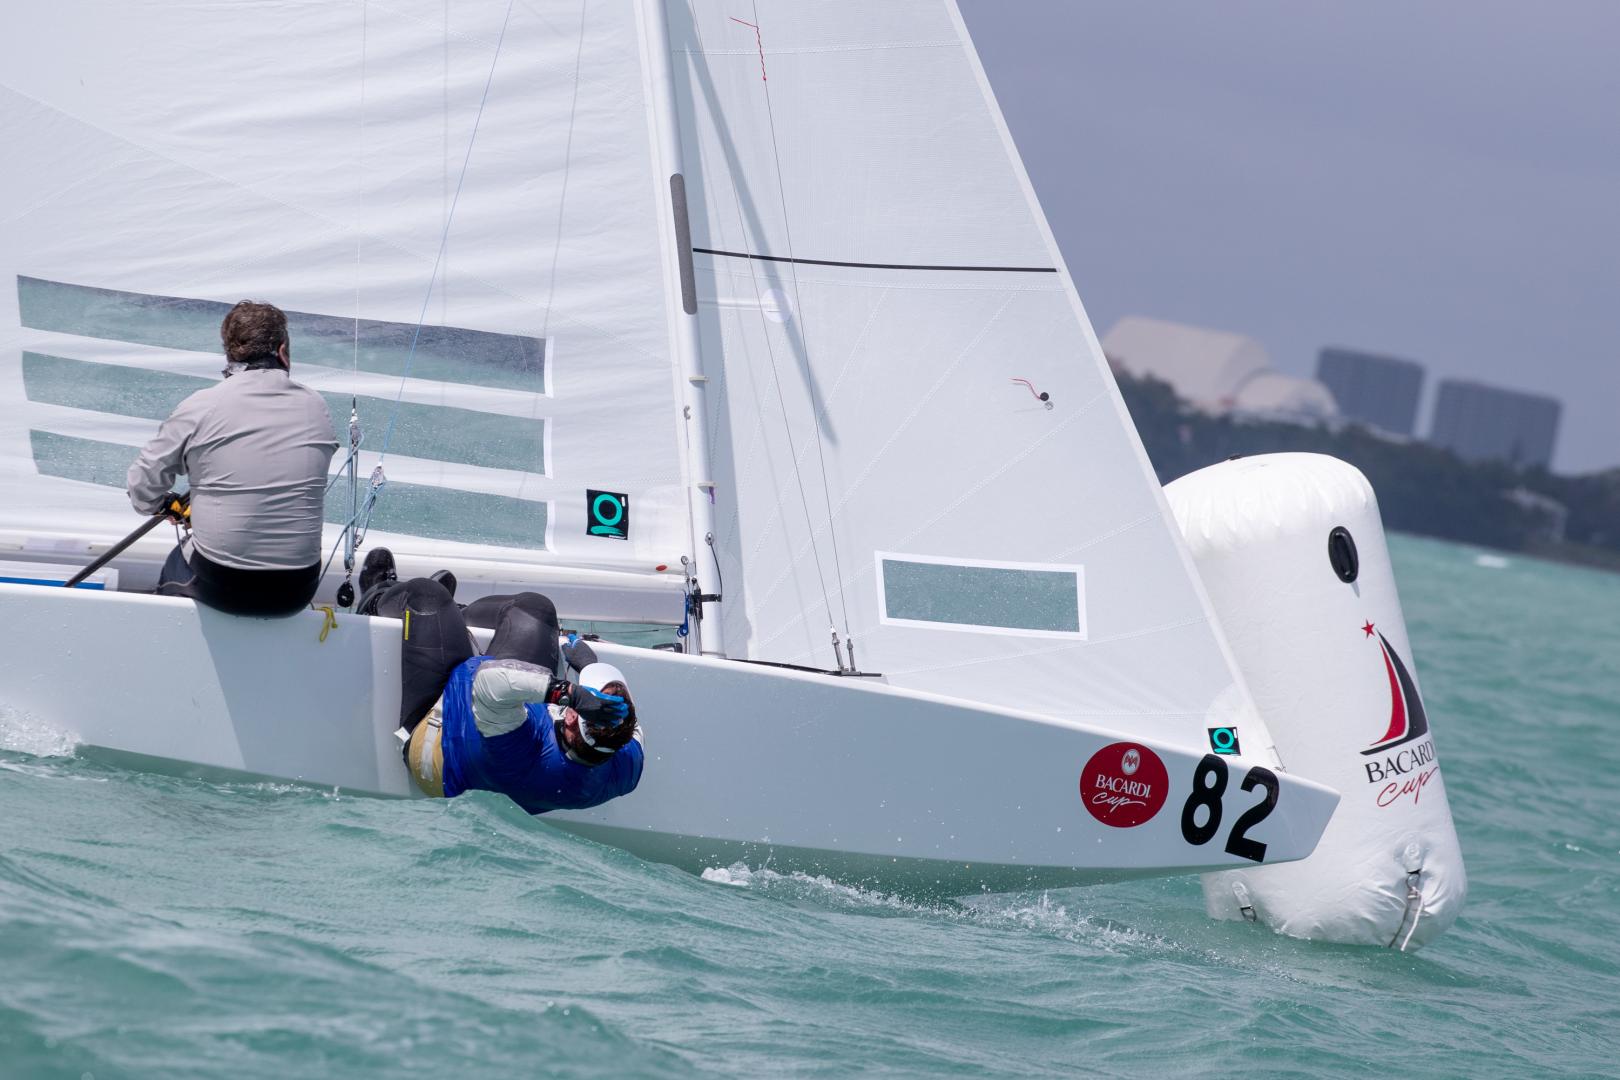 George Szabo/Guy Avellon (USA) wrap up with a third in race 2 